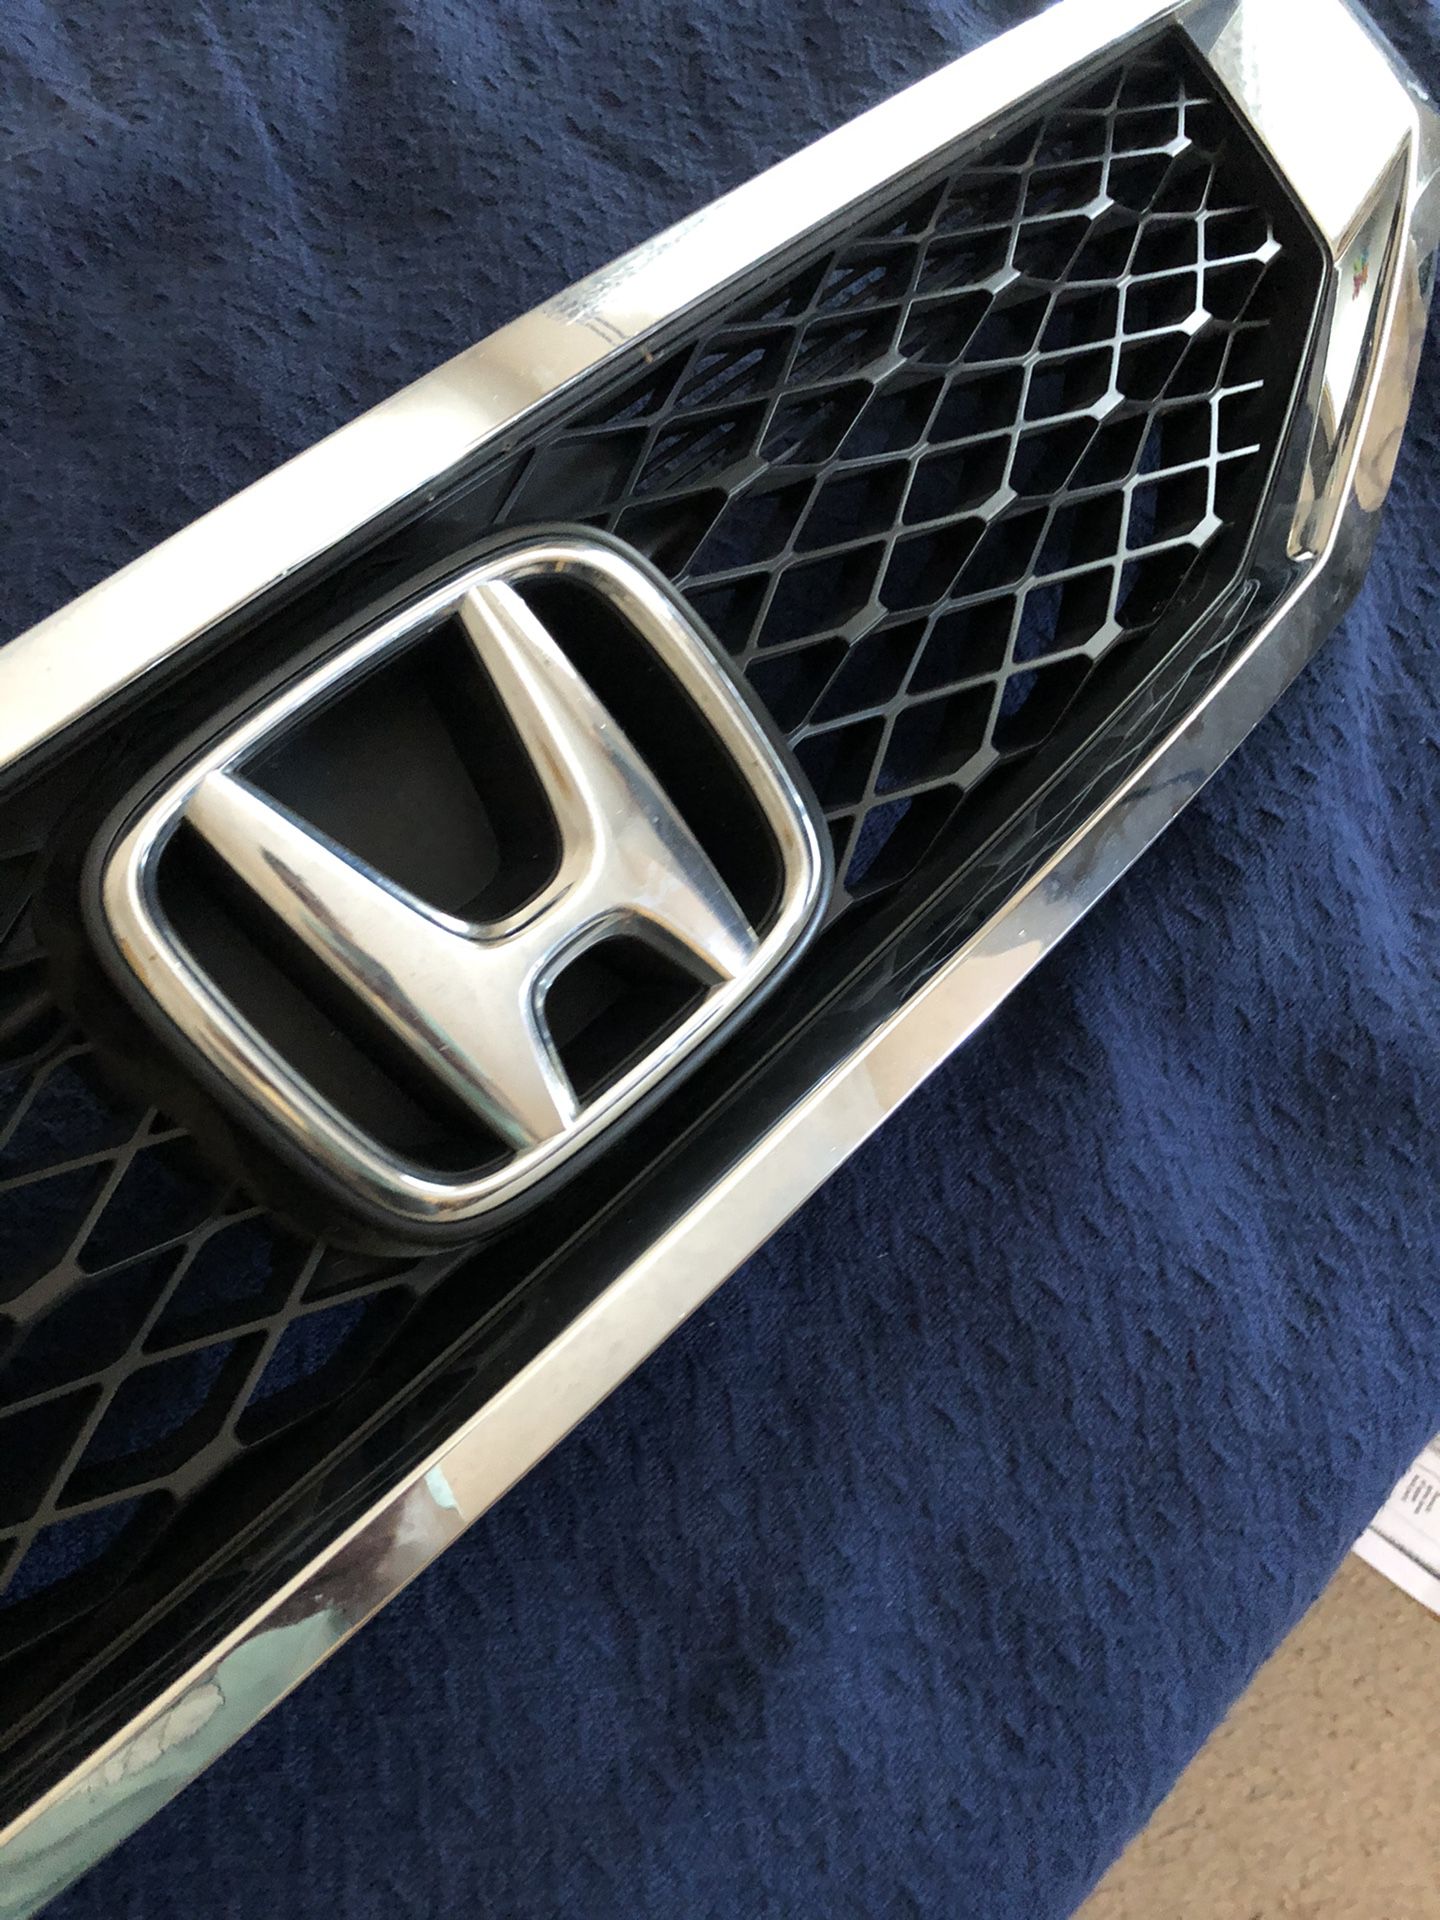 Honda Accord front car grille